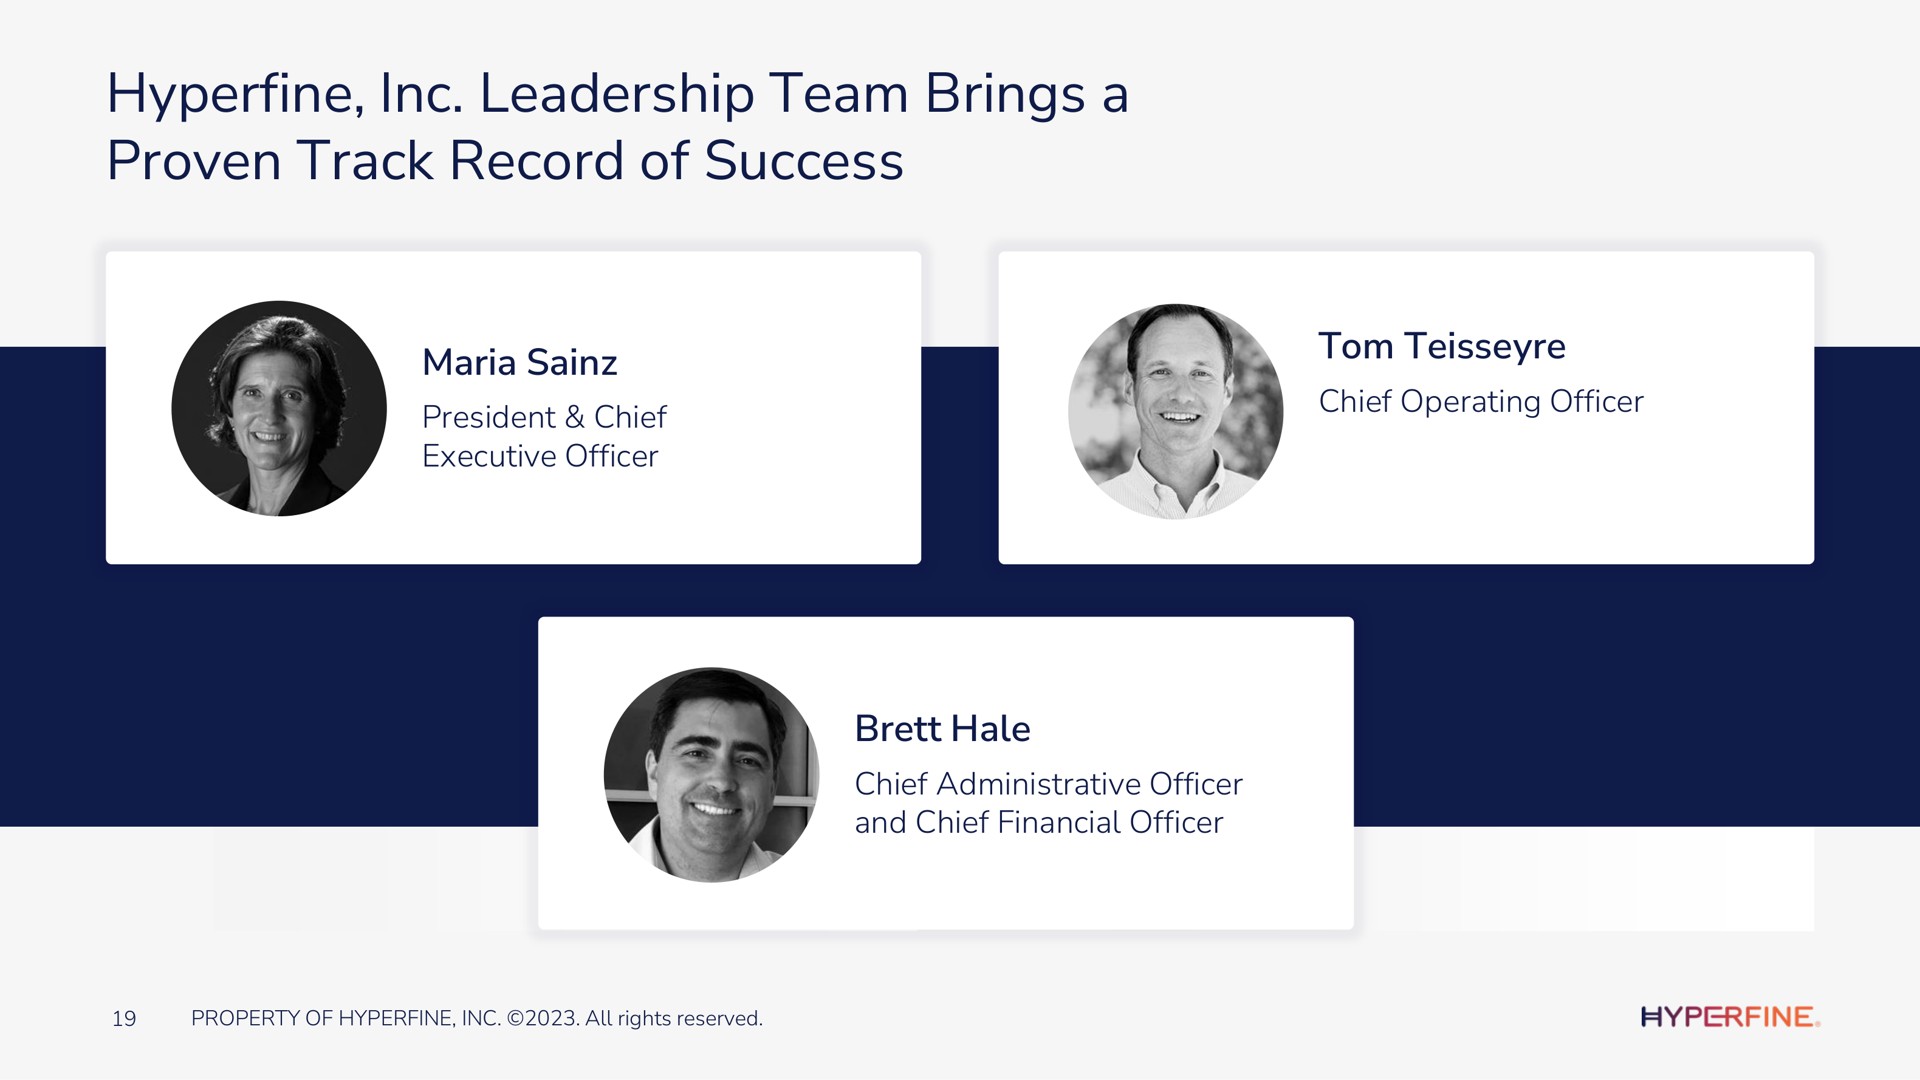 hyperfine leadership team brings a proven track record of success | Hyperfine